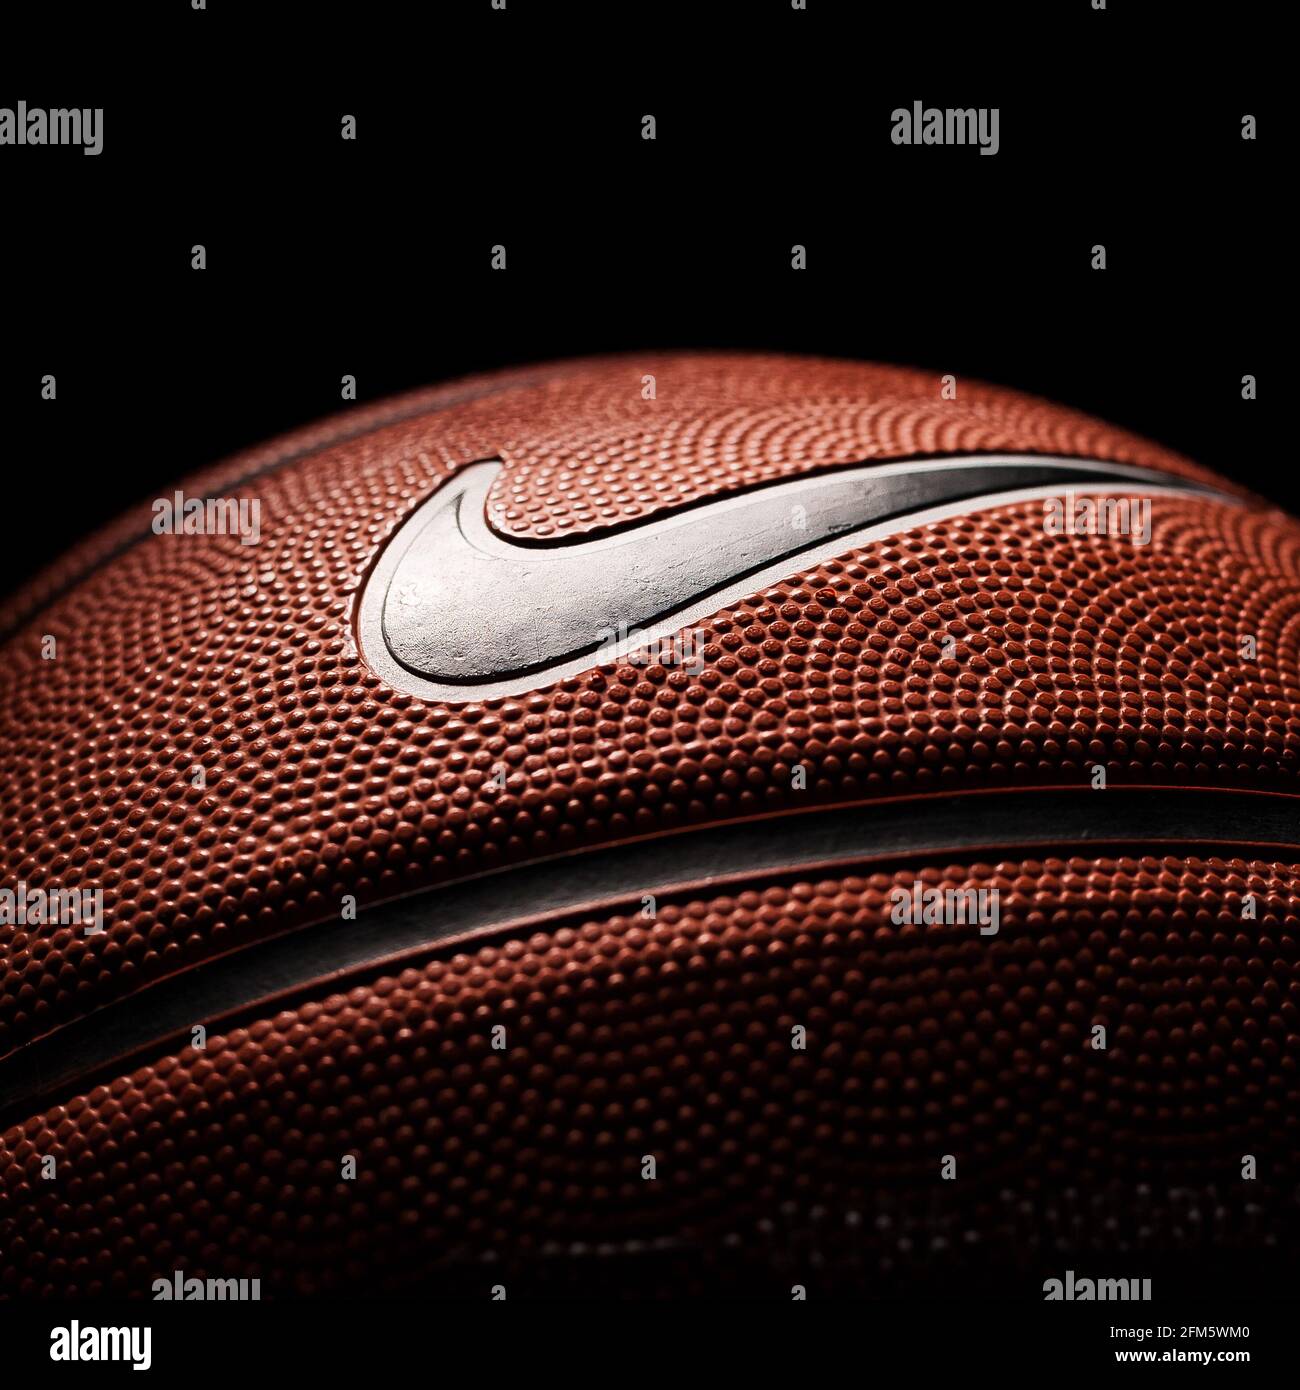 Nike brand, basketball ball Nike Baller. Orange rubber outdoor ball,  ultra-durable cover, close-up on a black background Stock Photo - Alamy